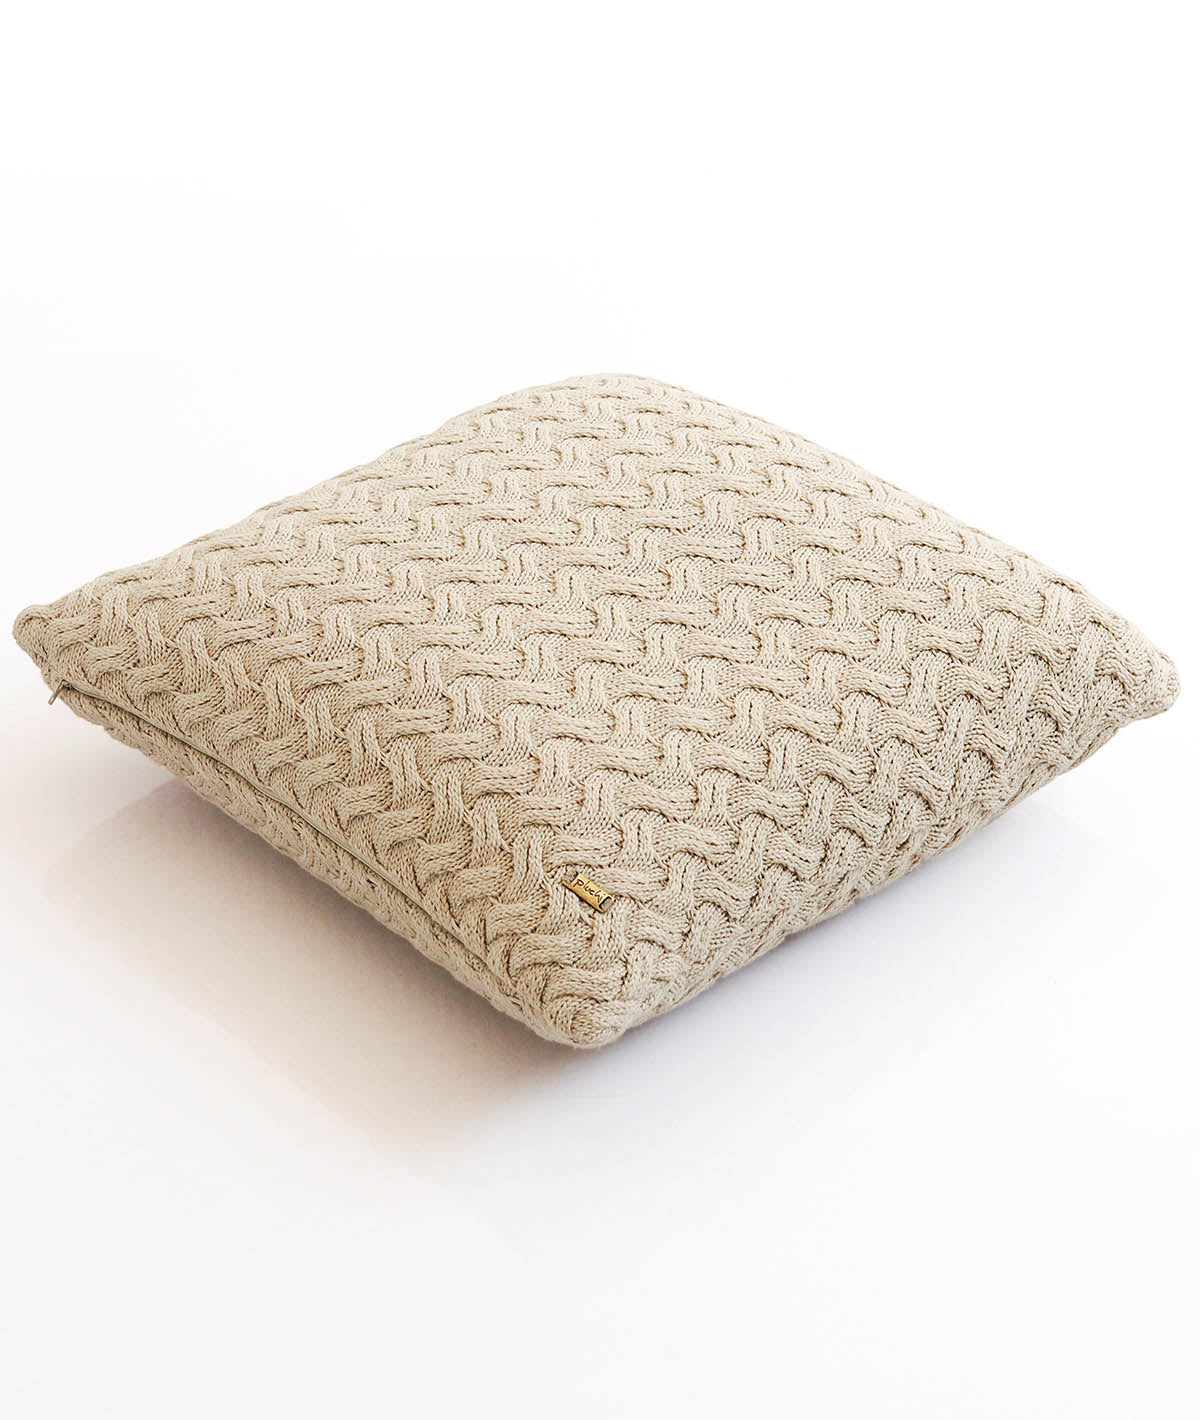 Criss Cross- Light Beige Cotton Knitted Decorative Cushion Cover (18" x 18")